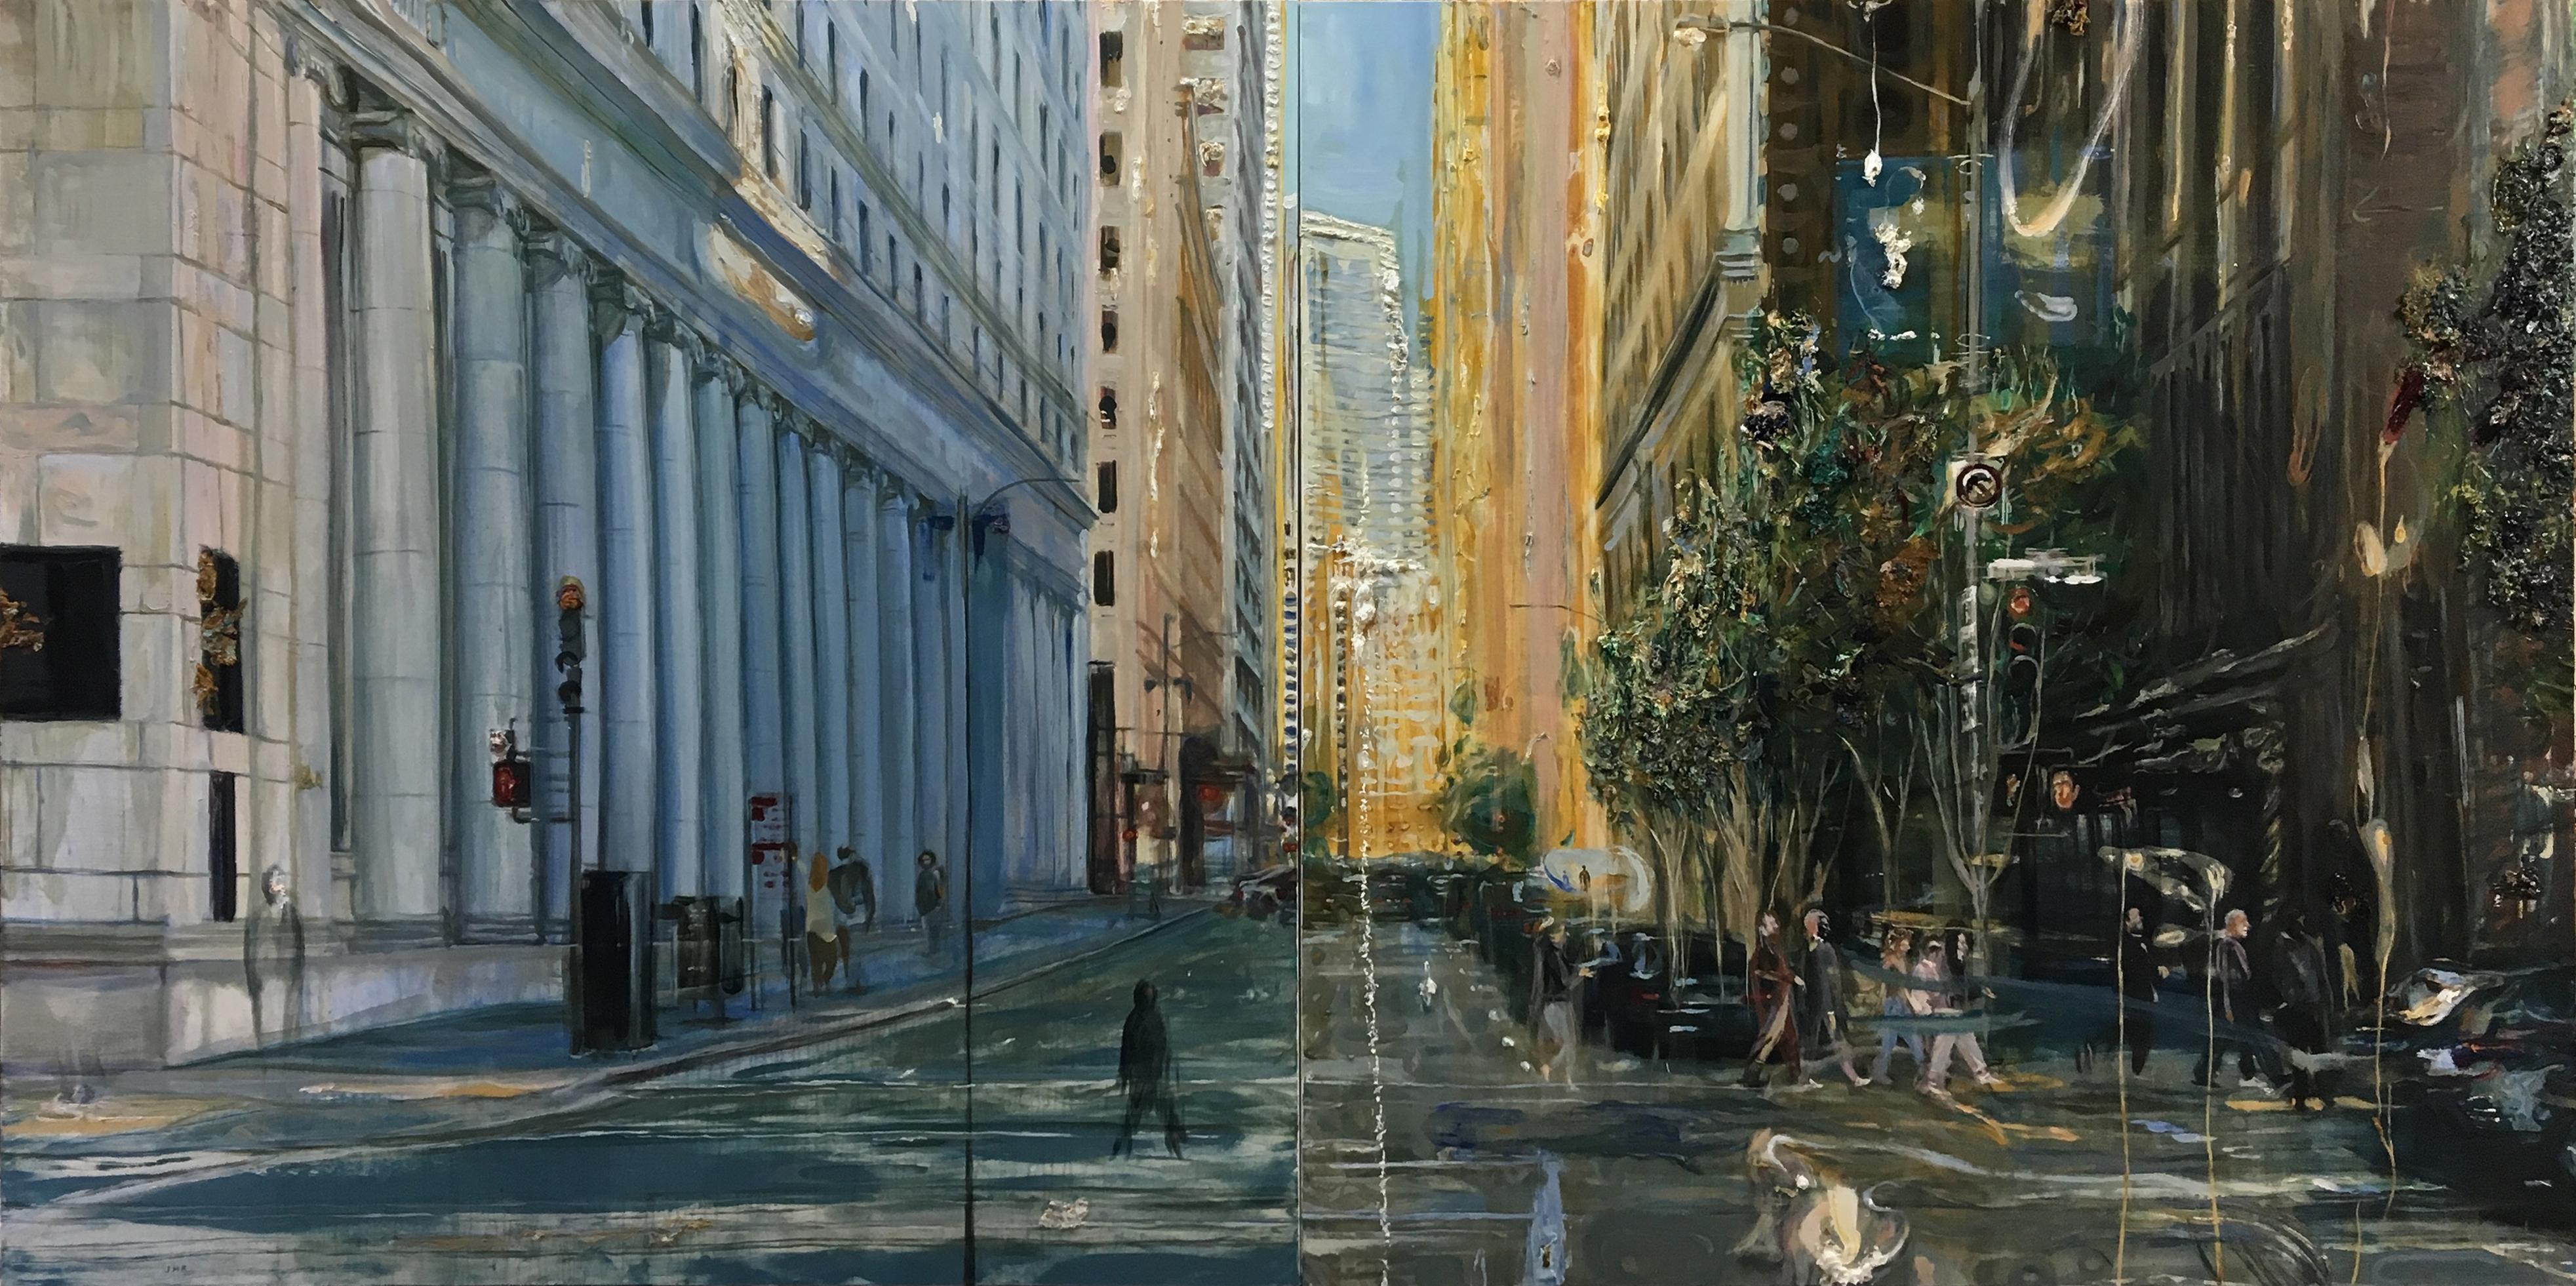 Jung Han Kim Landscape Painting - Montgomery St., Mid Century San Francisco cityscape in thick impasto oil